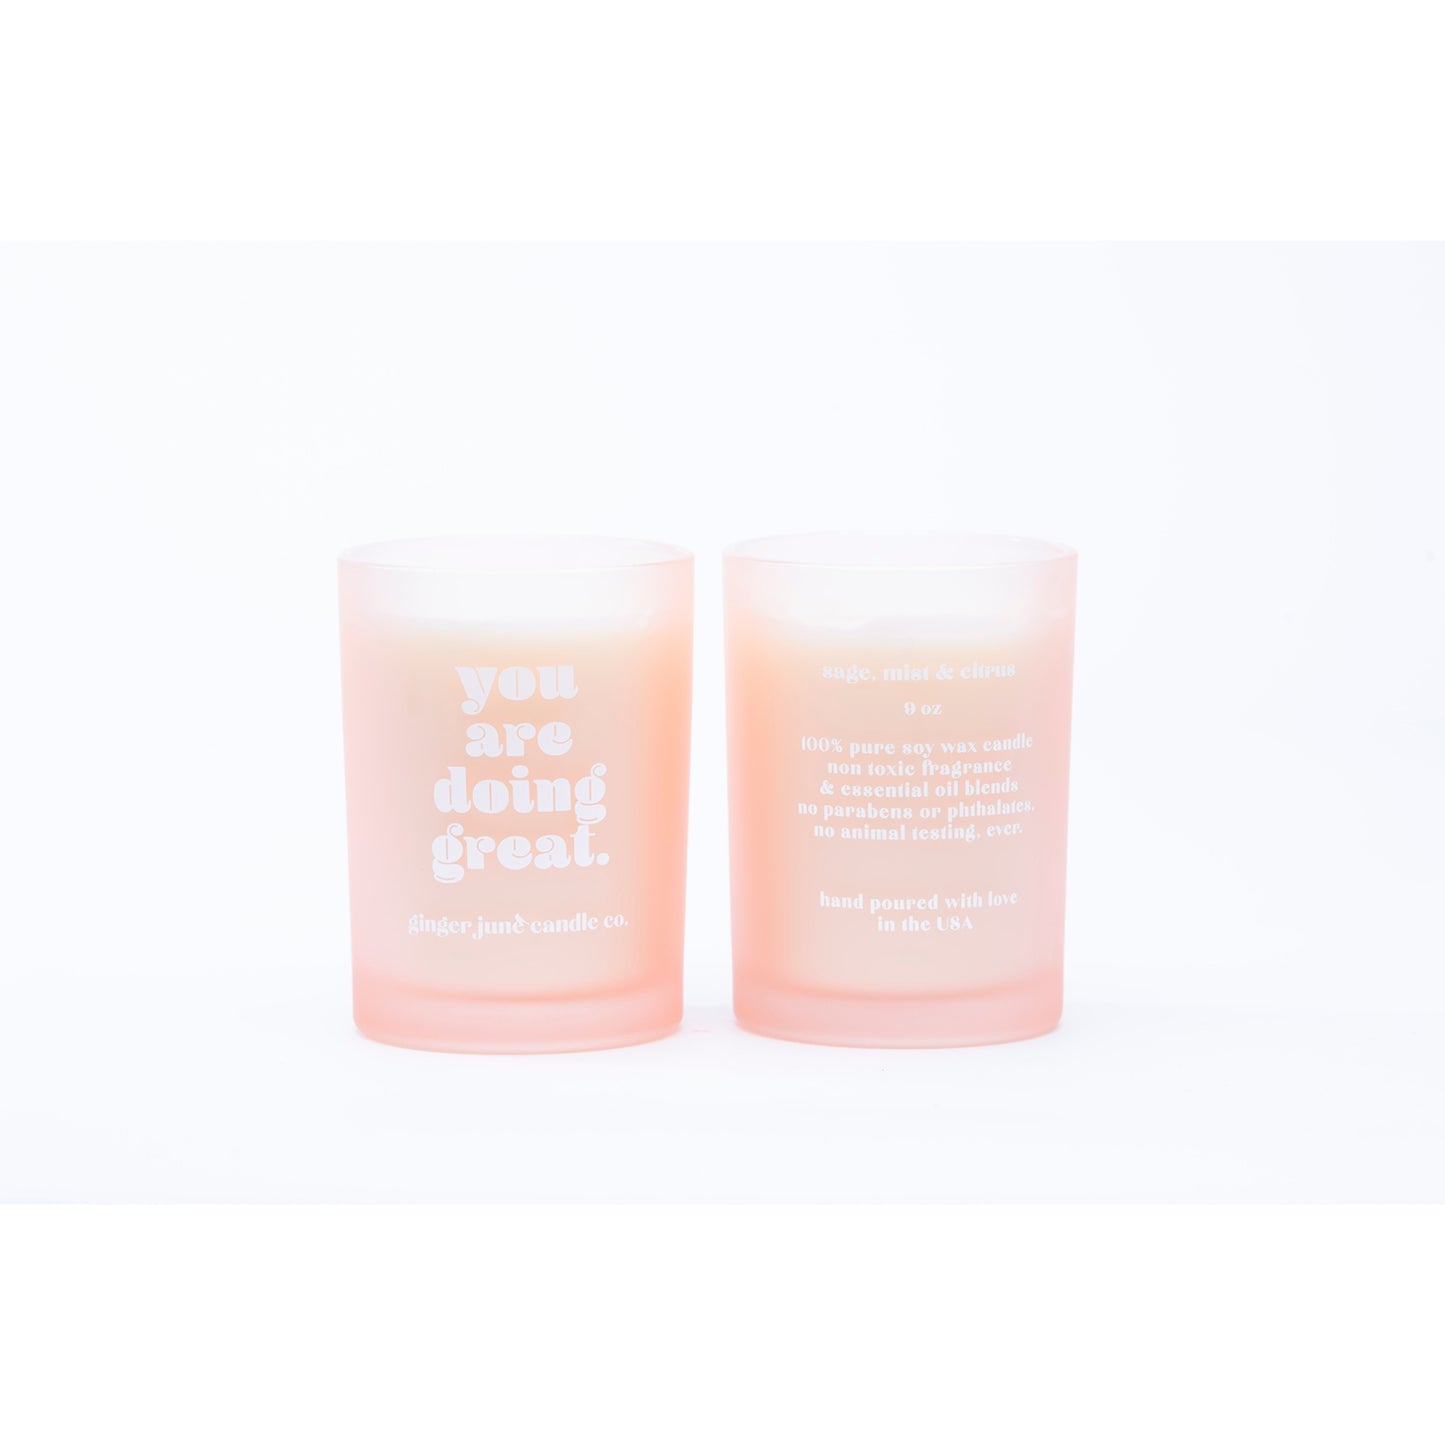 'You are doing great' 9oz candle